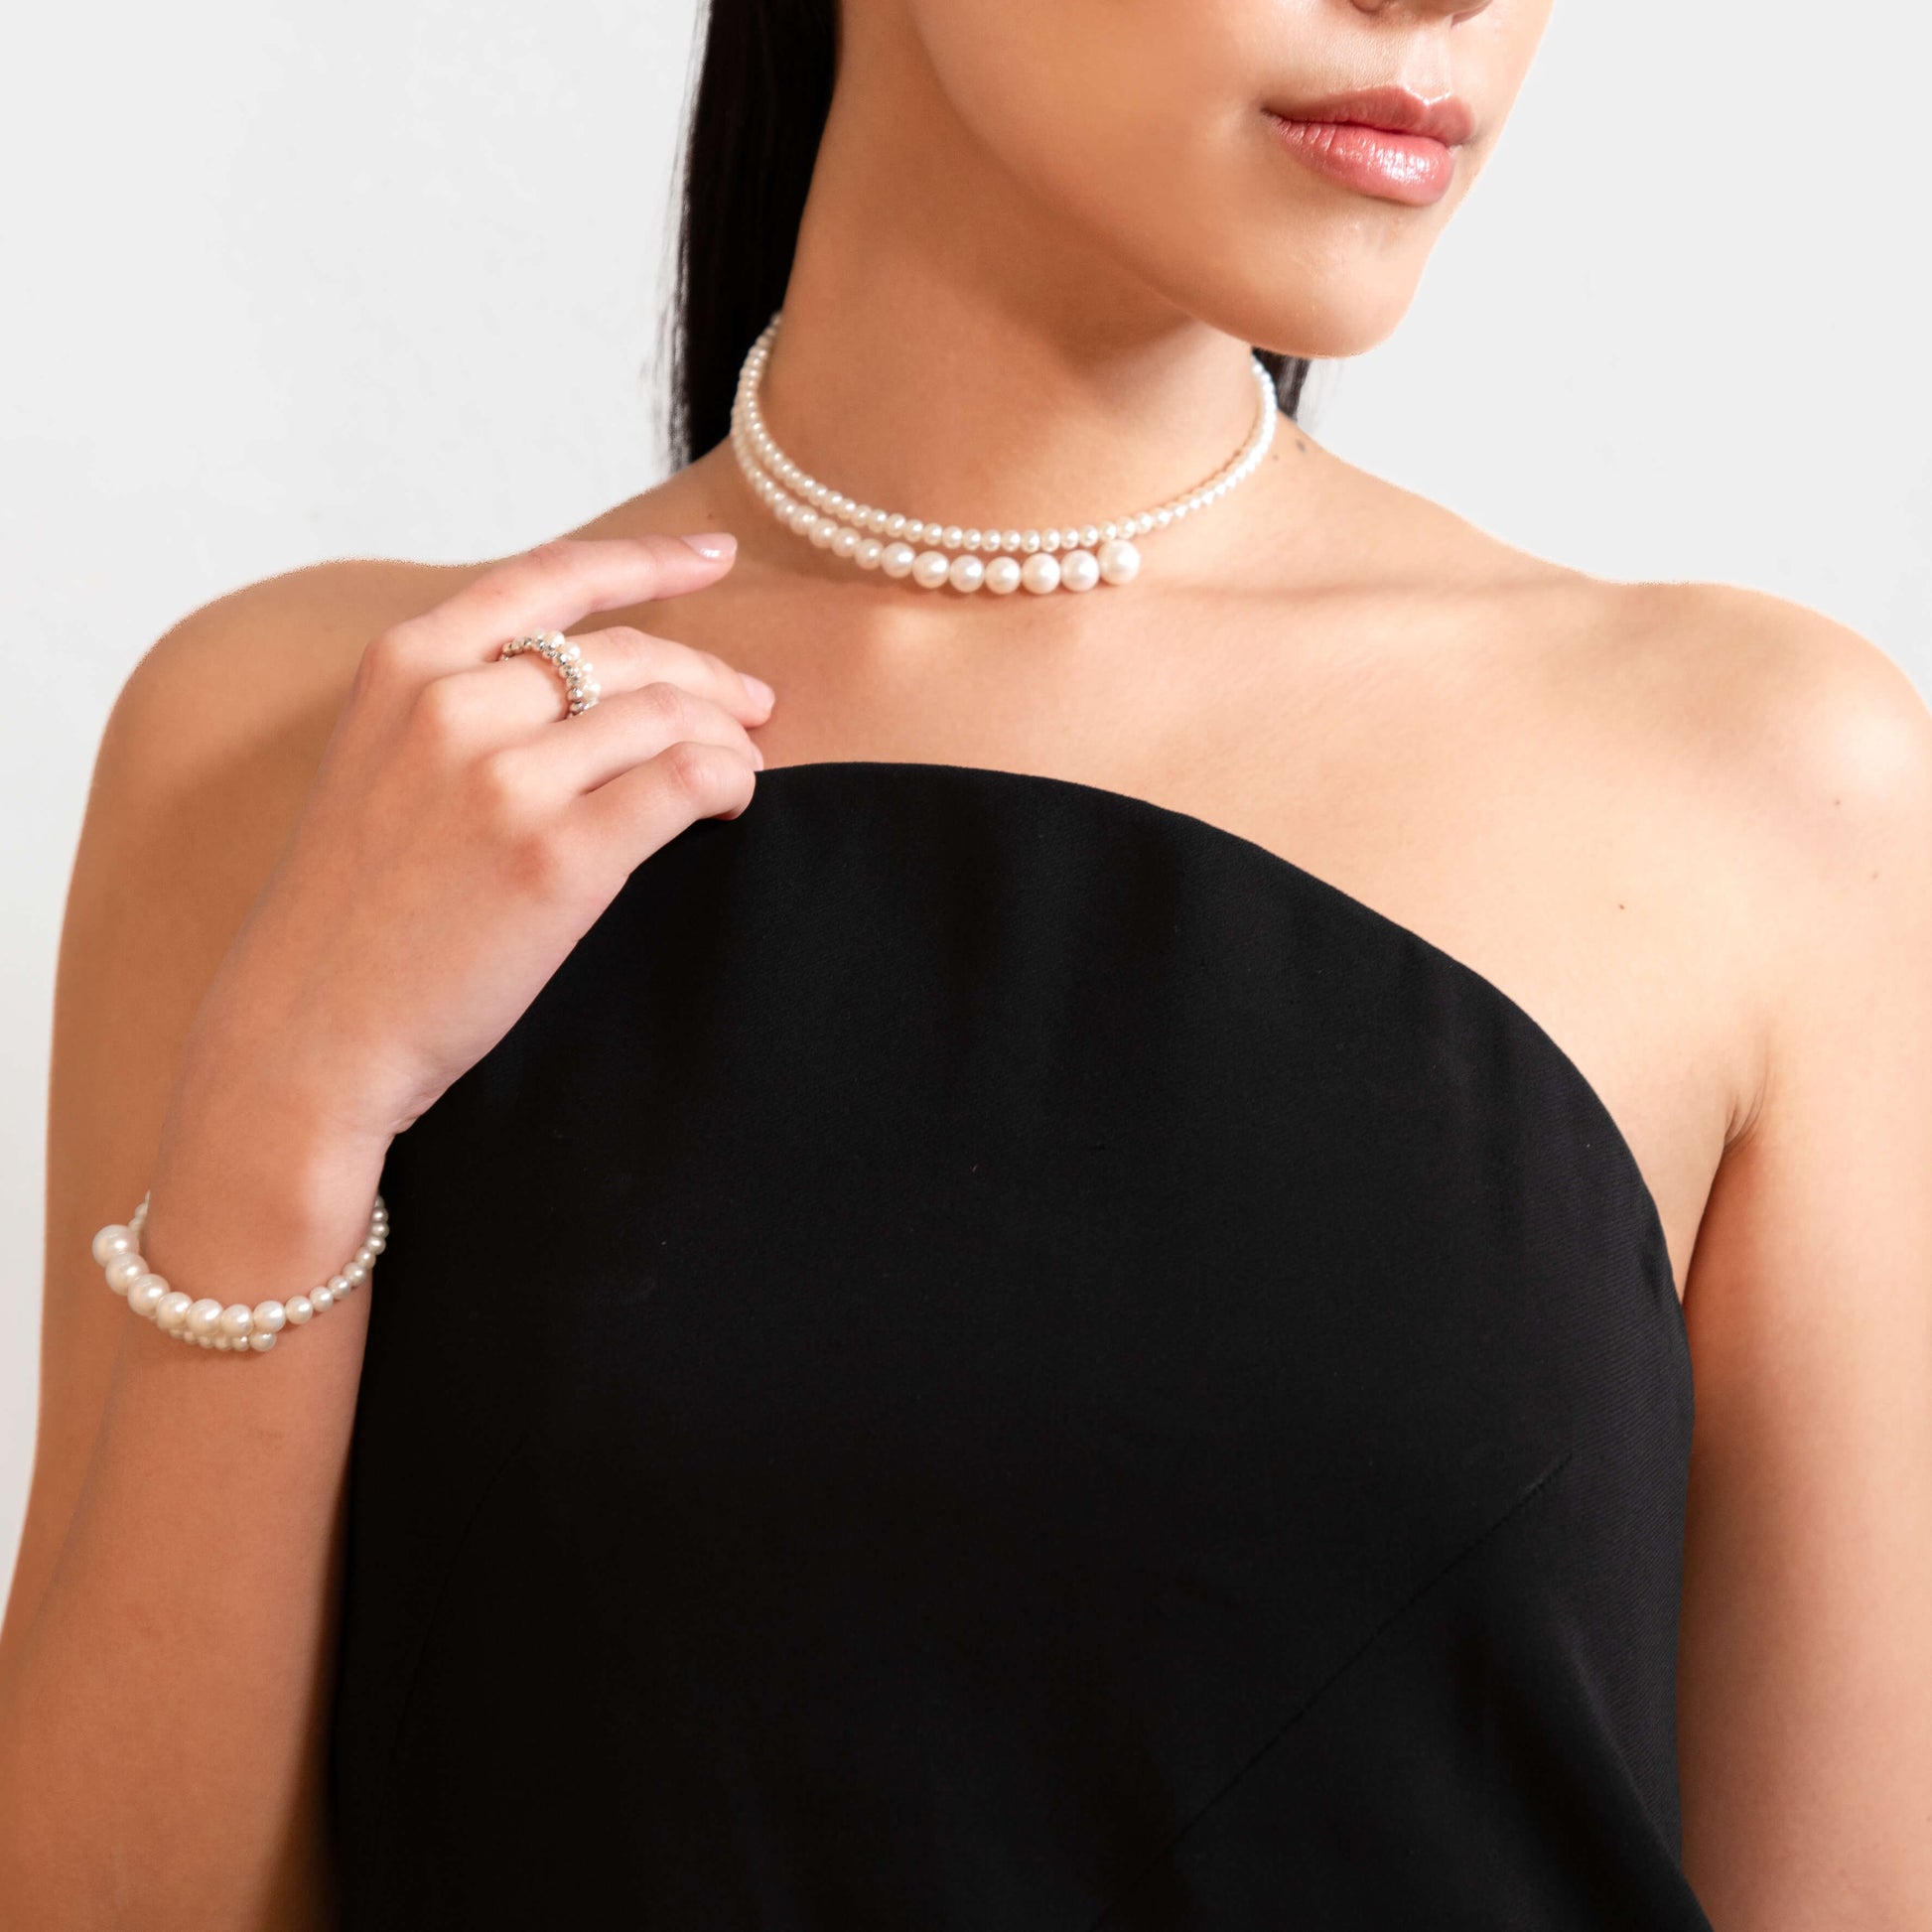 Beautiful model with pearl bracelet, necklace, and ring. Enhance your style today.